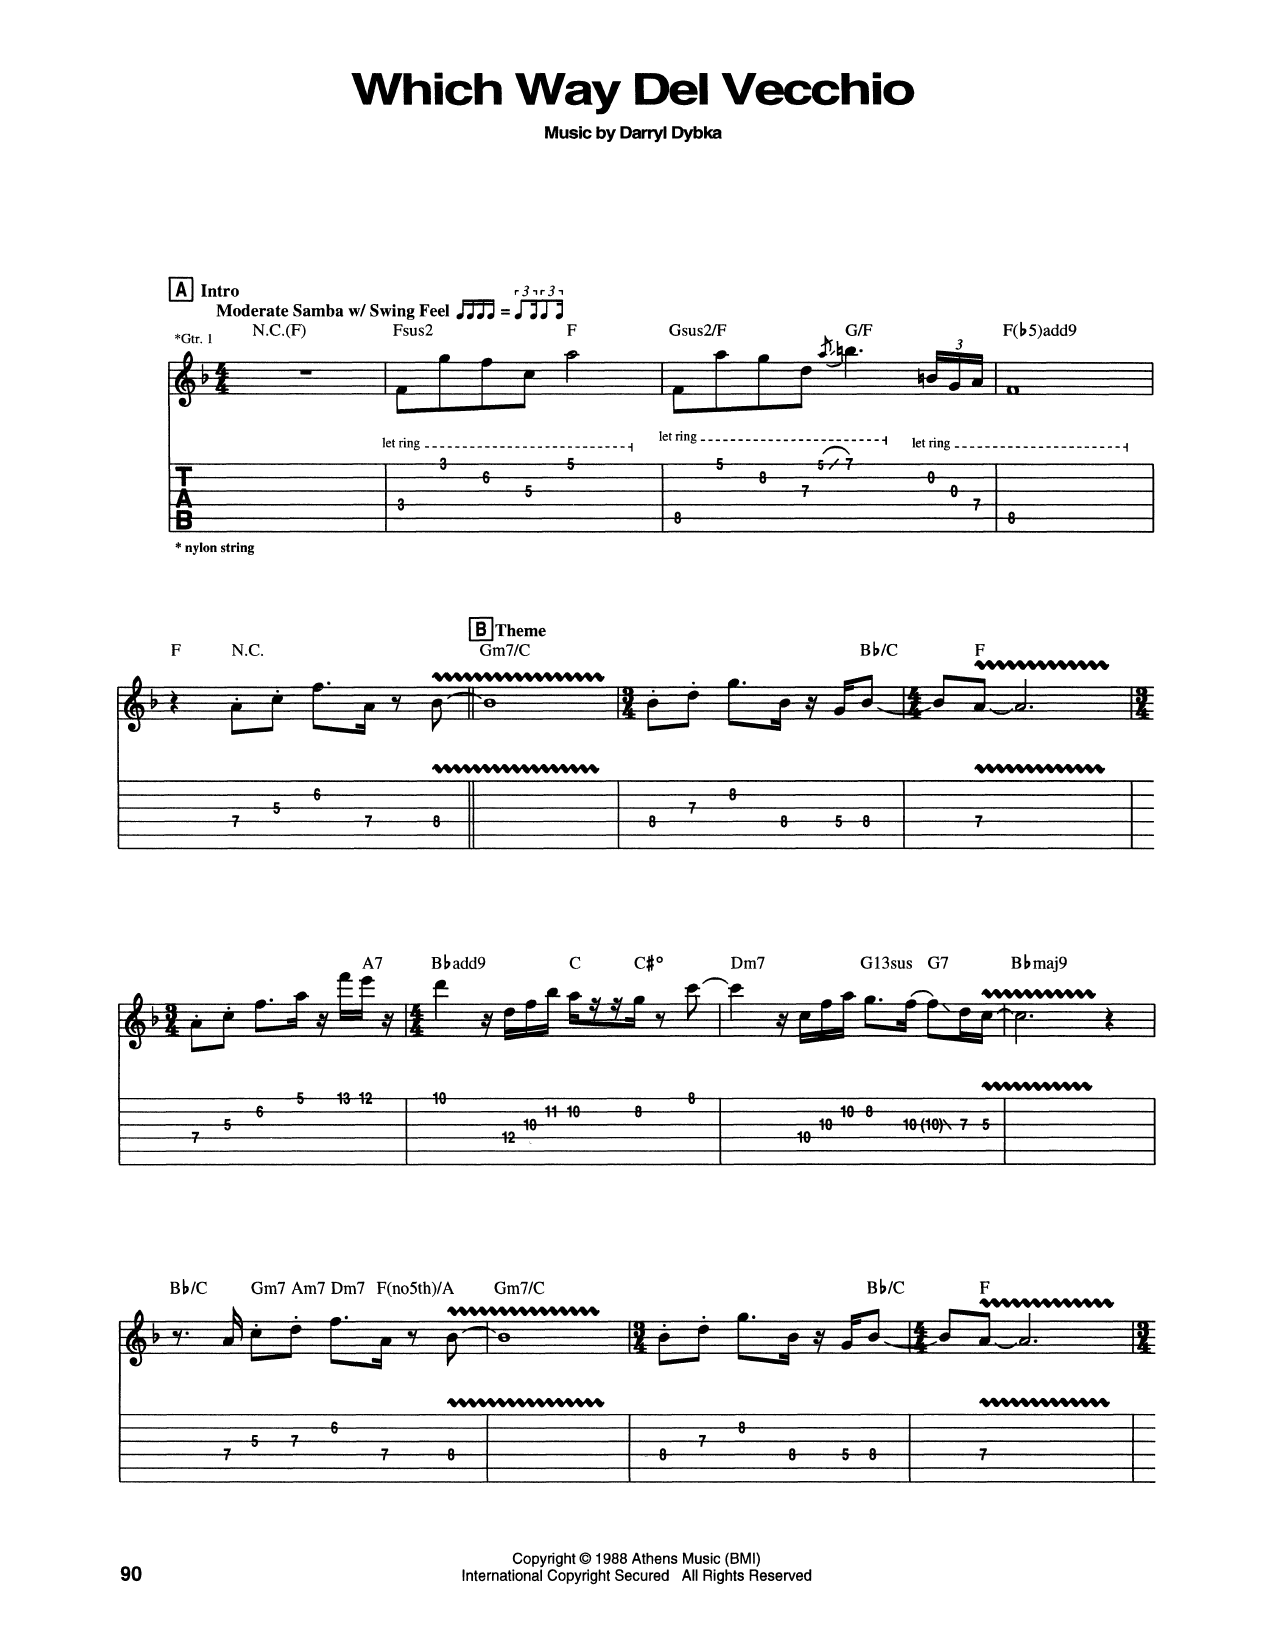 Download Chet Atkins Which Way Del Vecchio Sheet Music